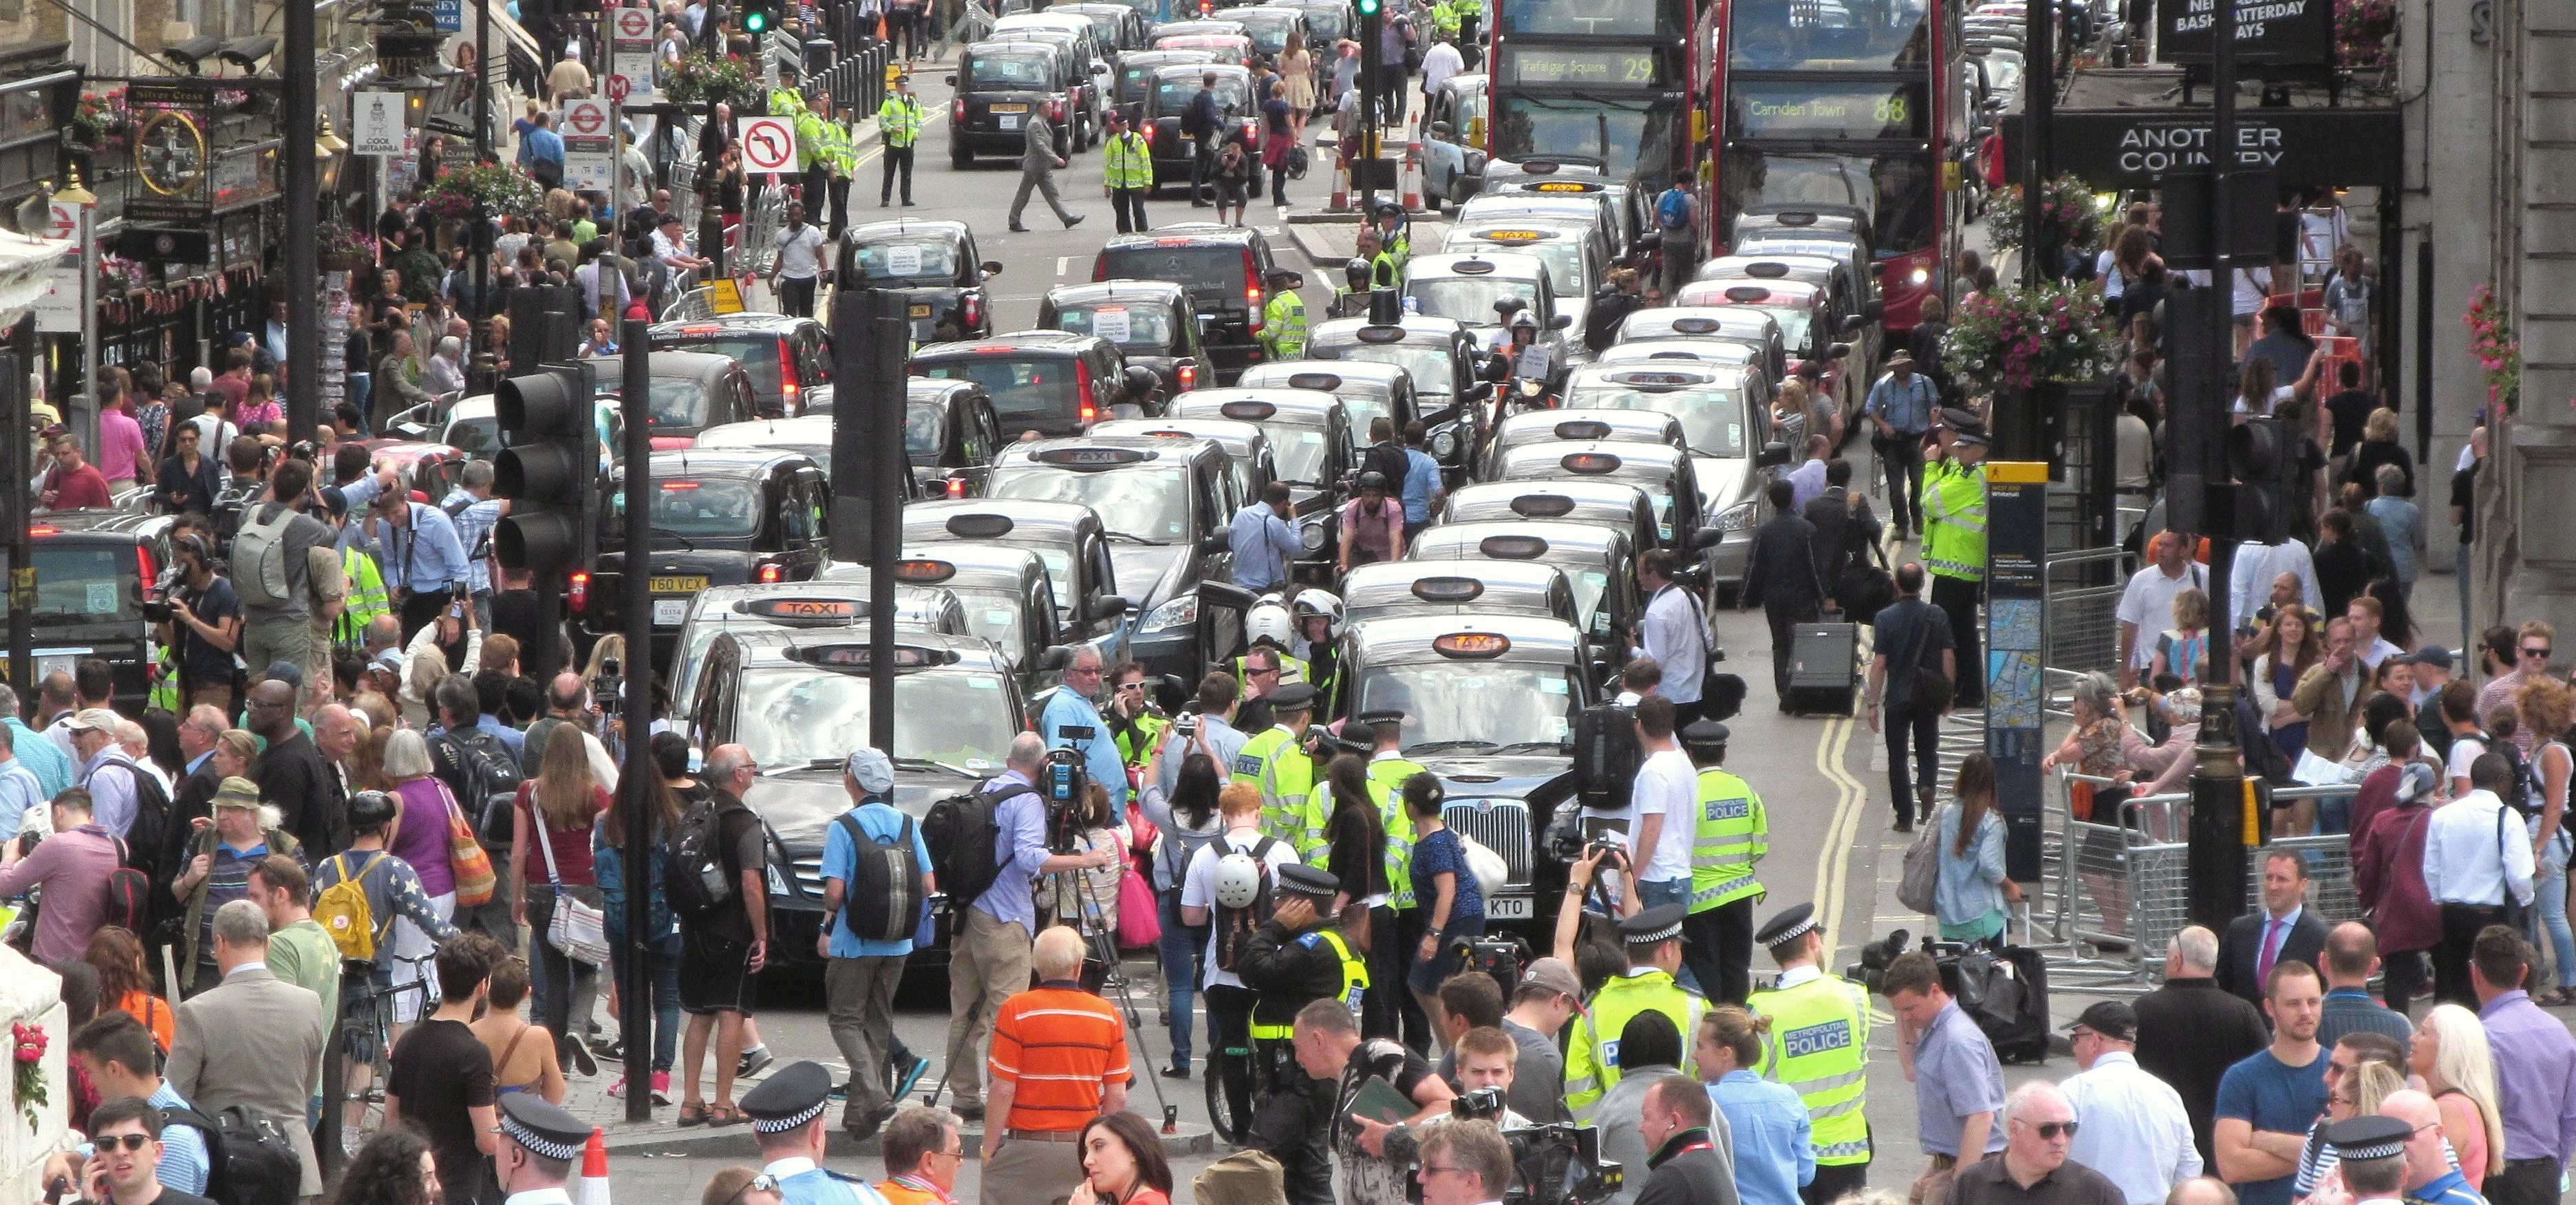 London anti-Uber taxi protest June 11 2014 035